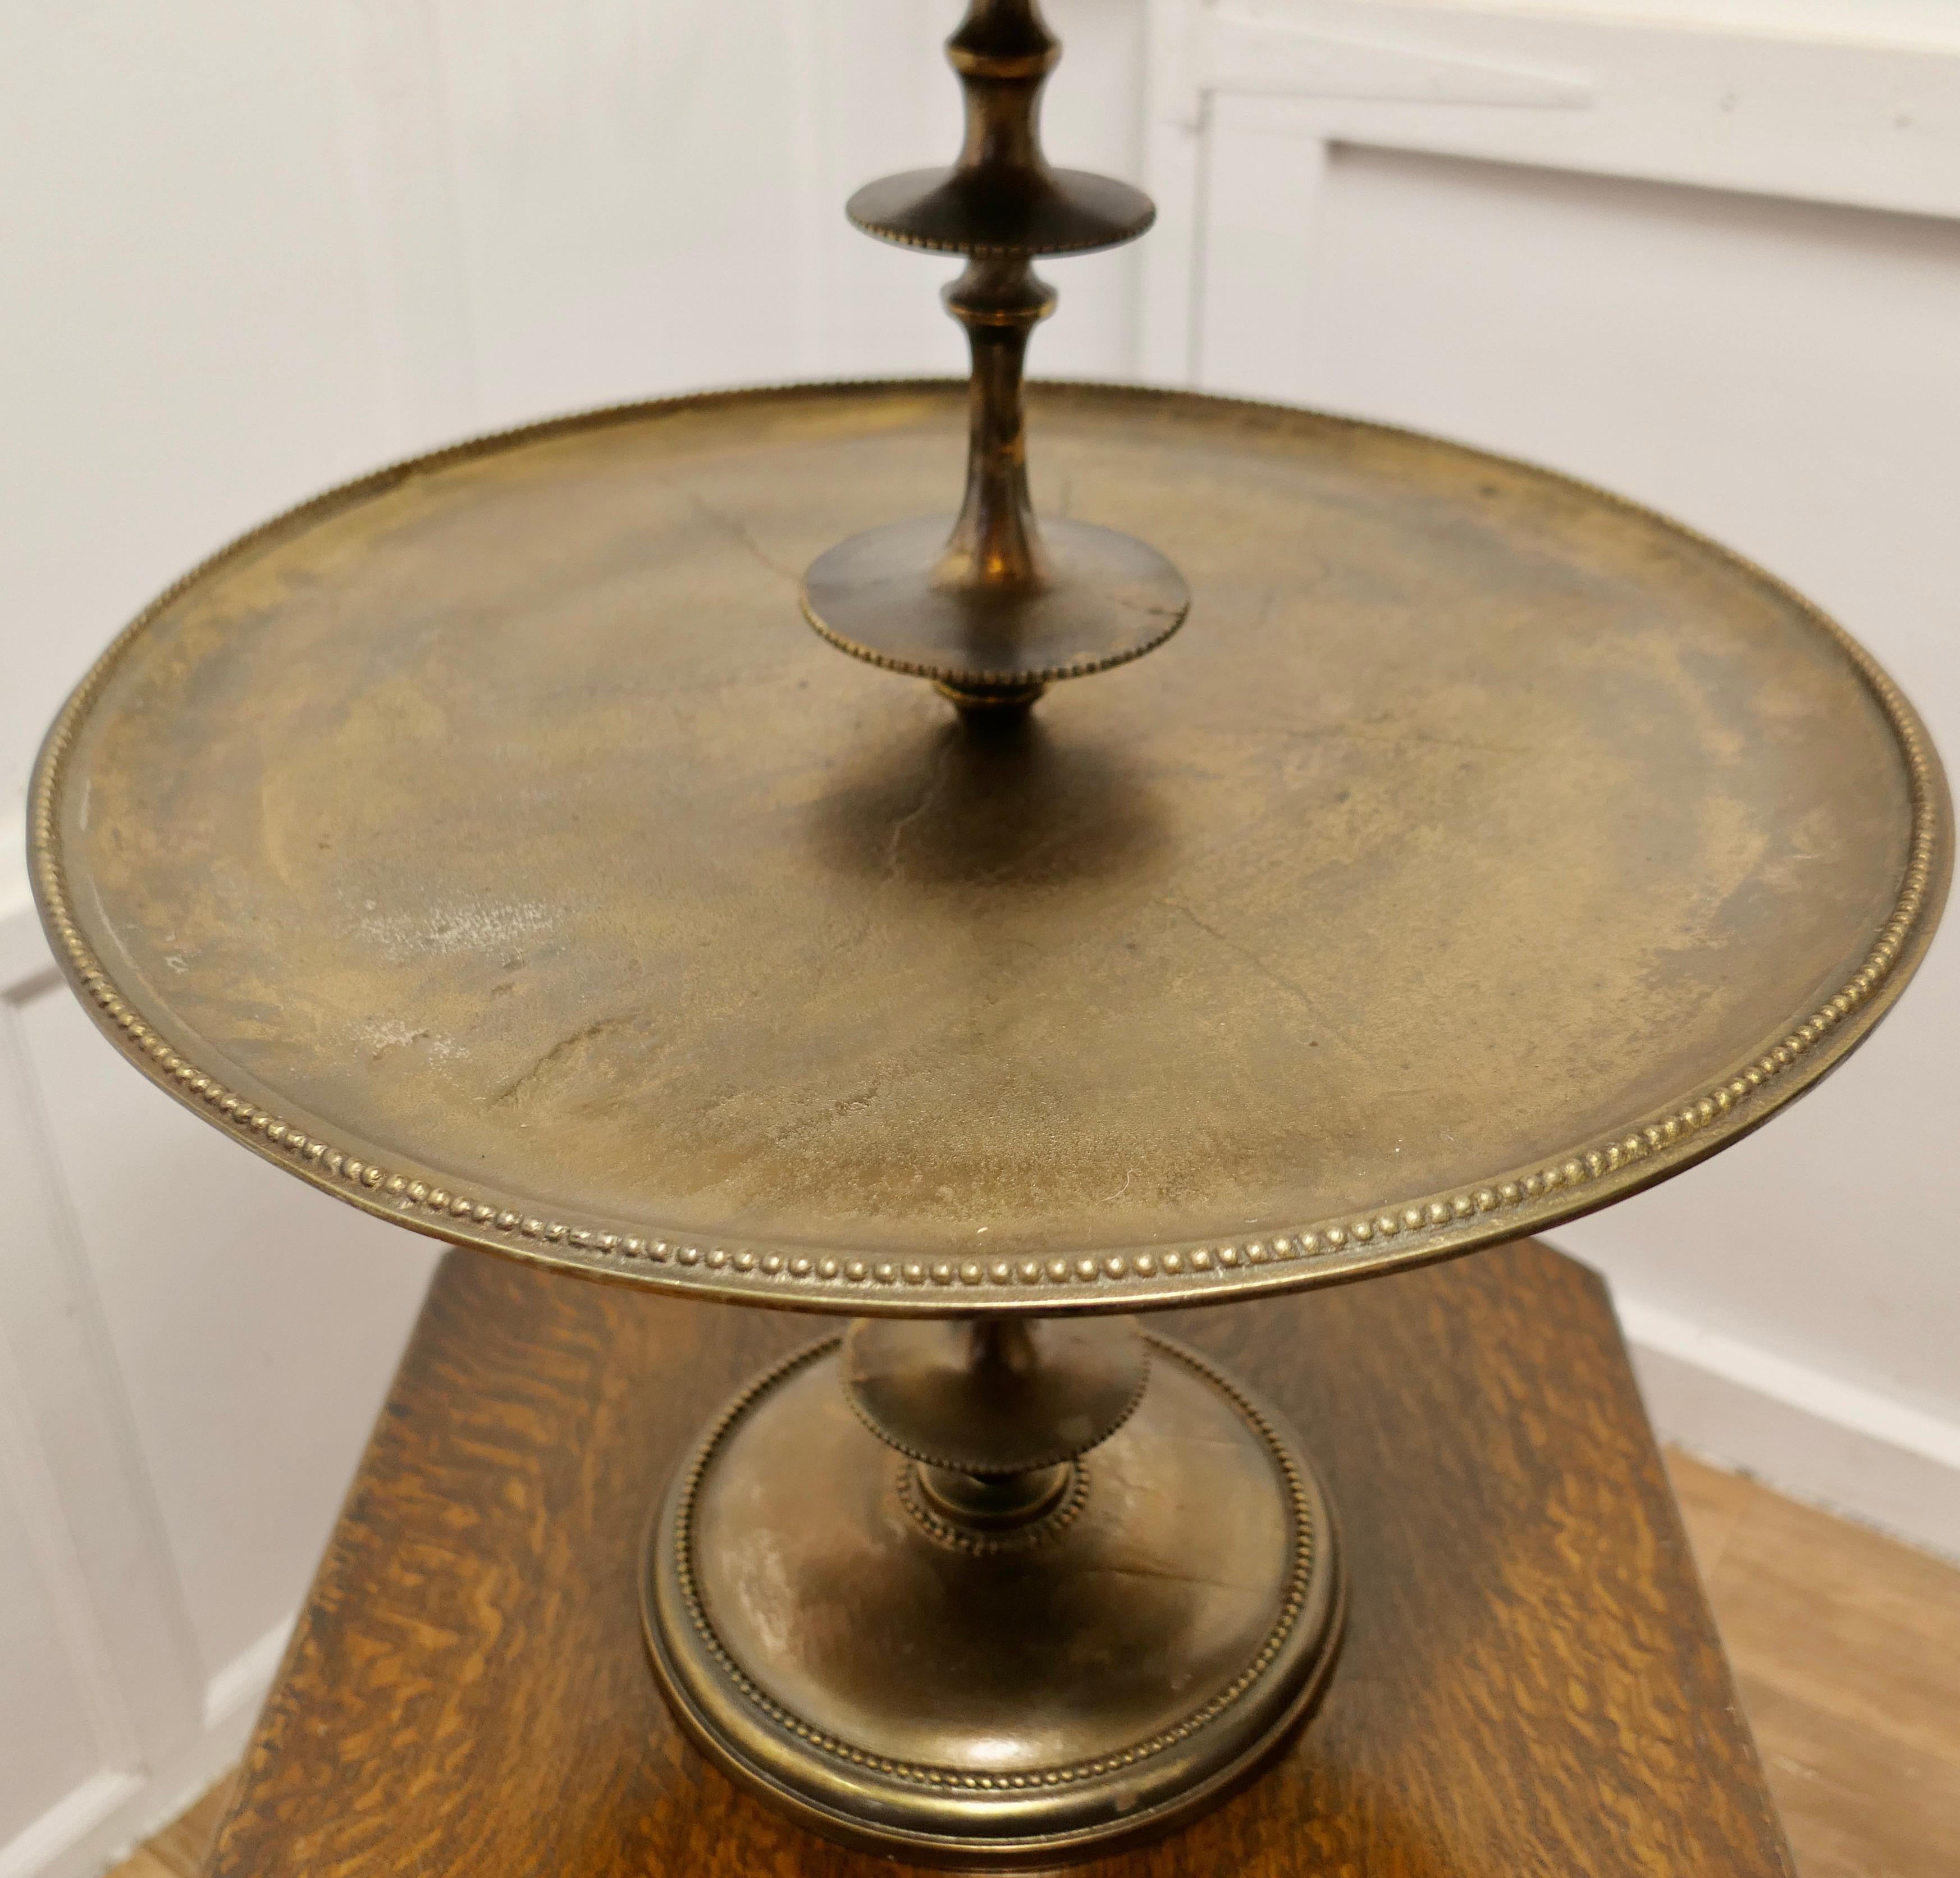 Early 20th Century Huge Gueridon Cake Stand or Dumb Waiter   A charming and unusual piece  For Sale